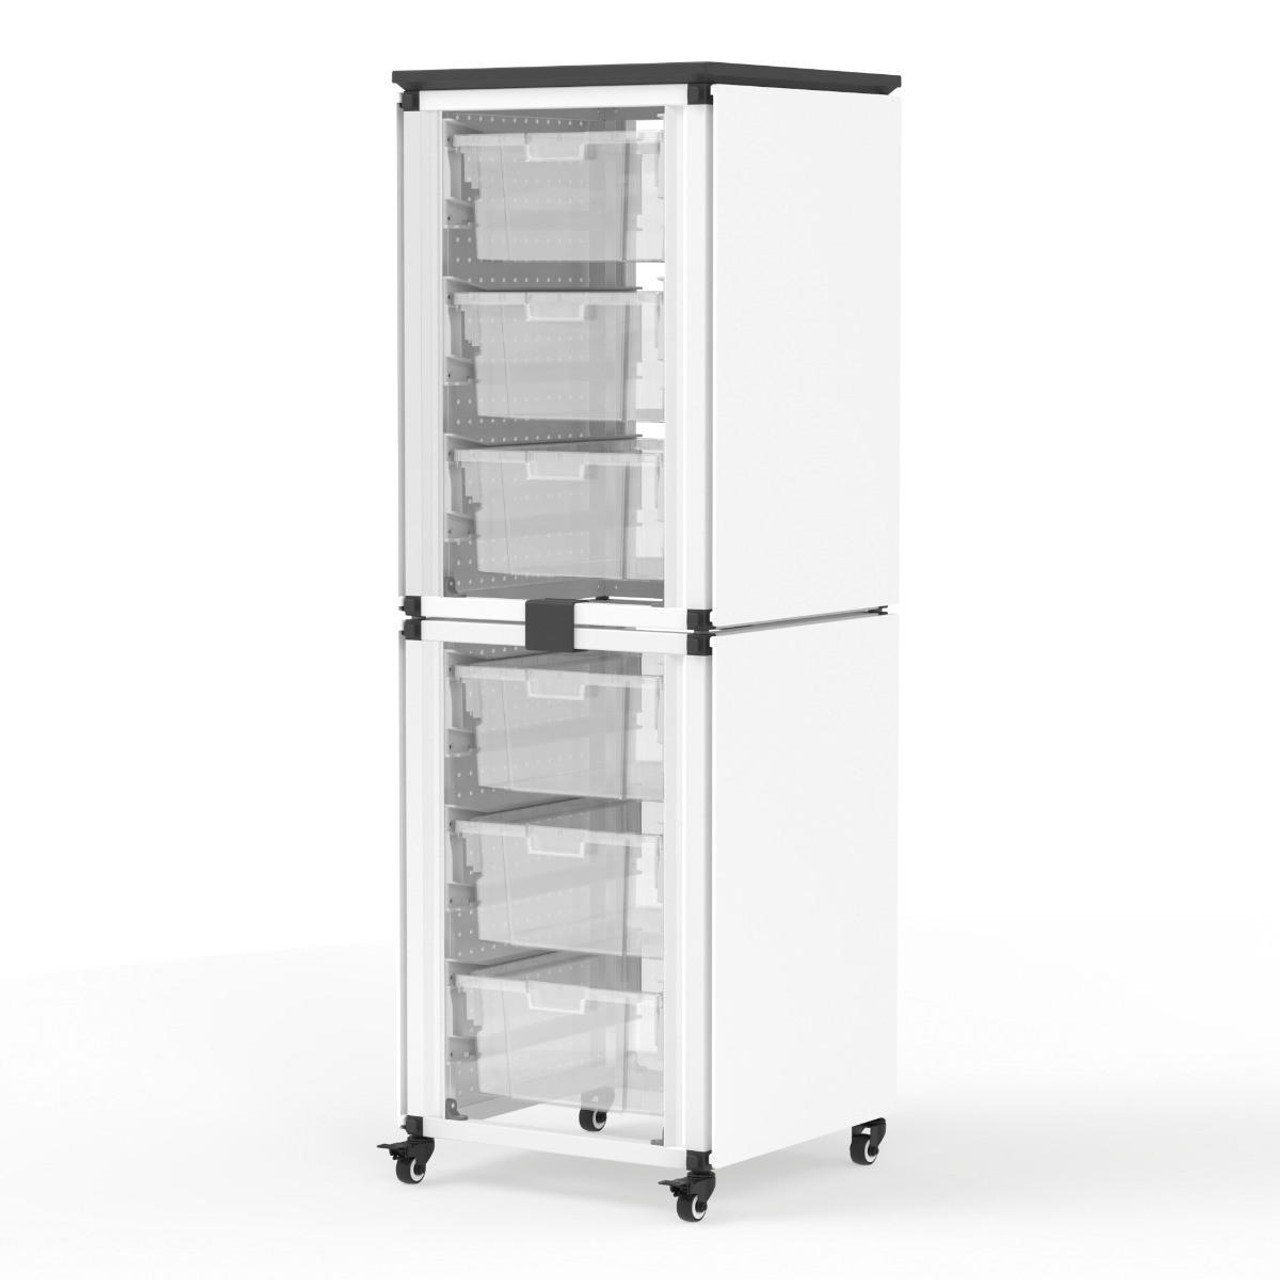 Modular Classroom Storage Cabinet - 2 stacked modules with 6 large bins ...